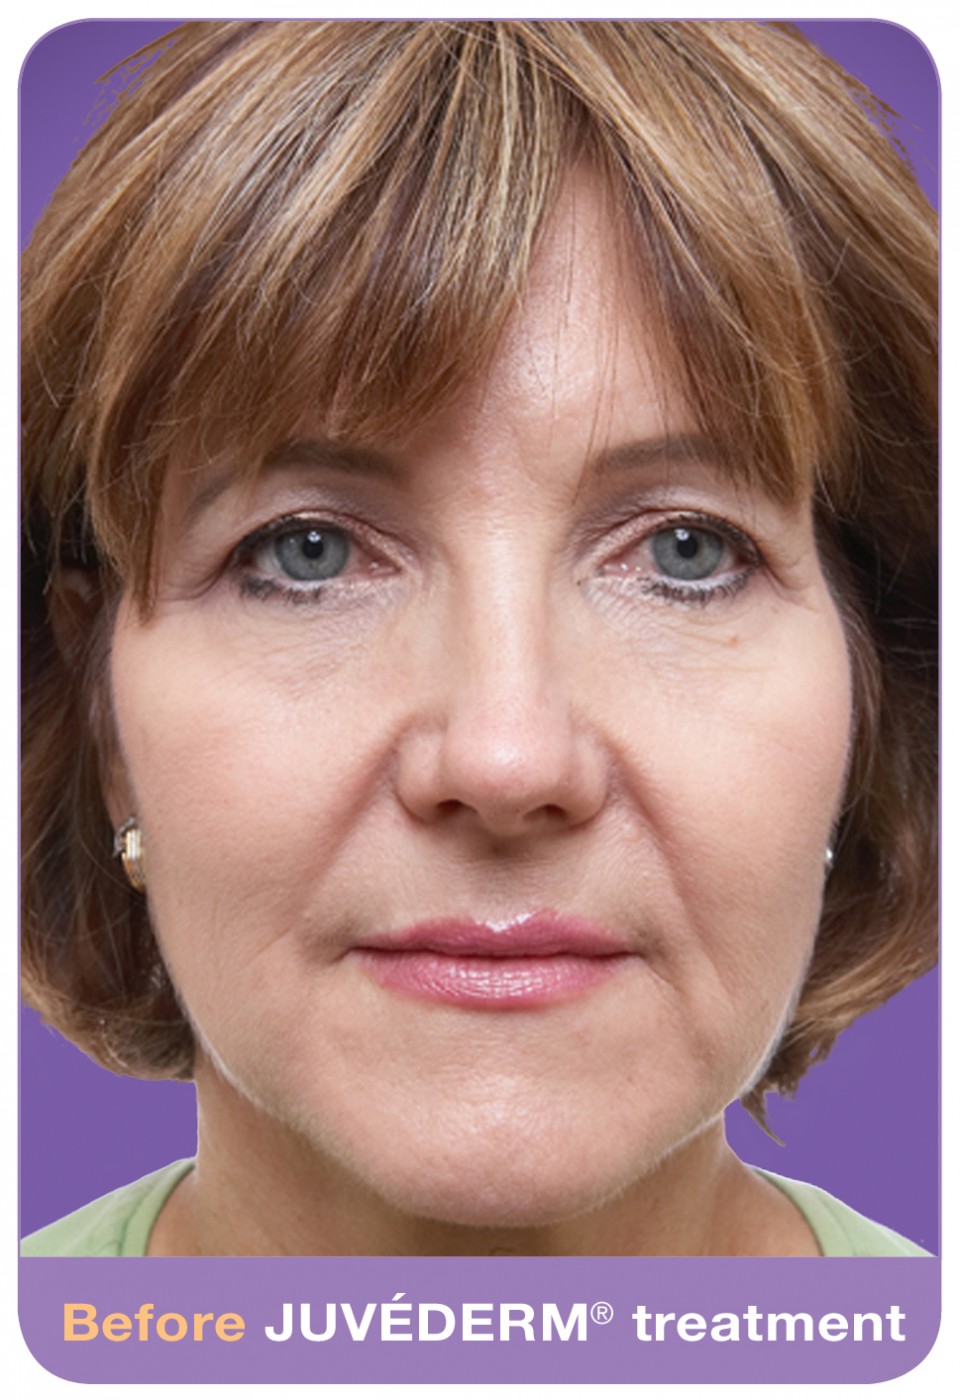 Here is Sandy BEFORE her JUVEDERM injection restoration